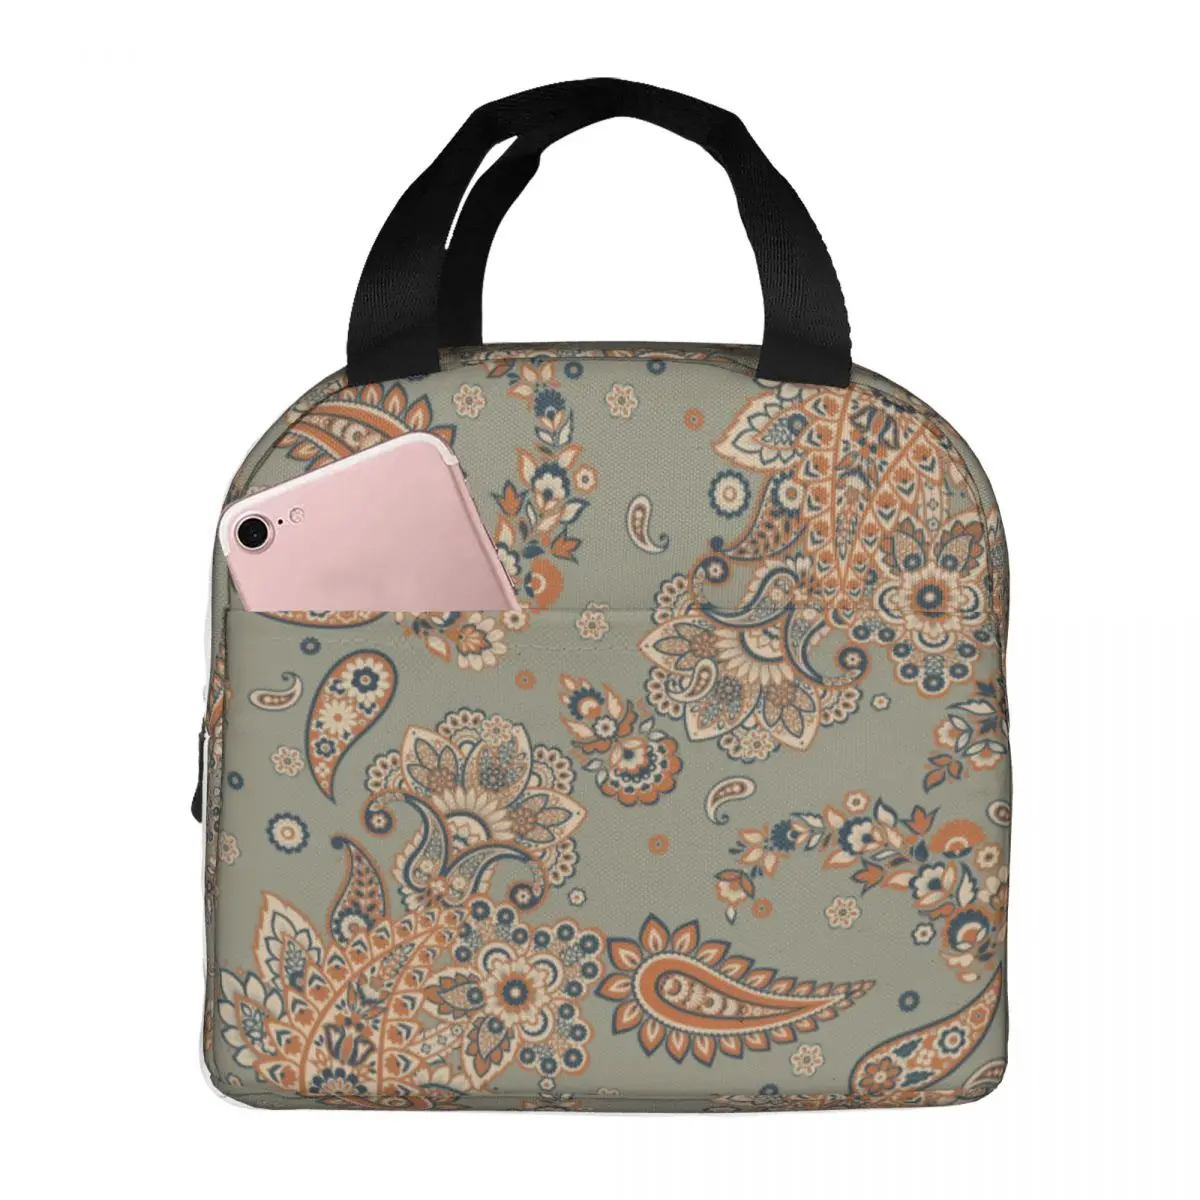 Lunch Bag for Women Kids Paisley Insulated Cooler Bag Portable Picnic Oxford Lunch Box Handbags